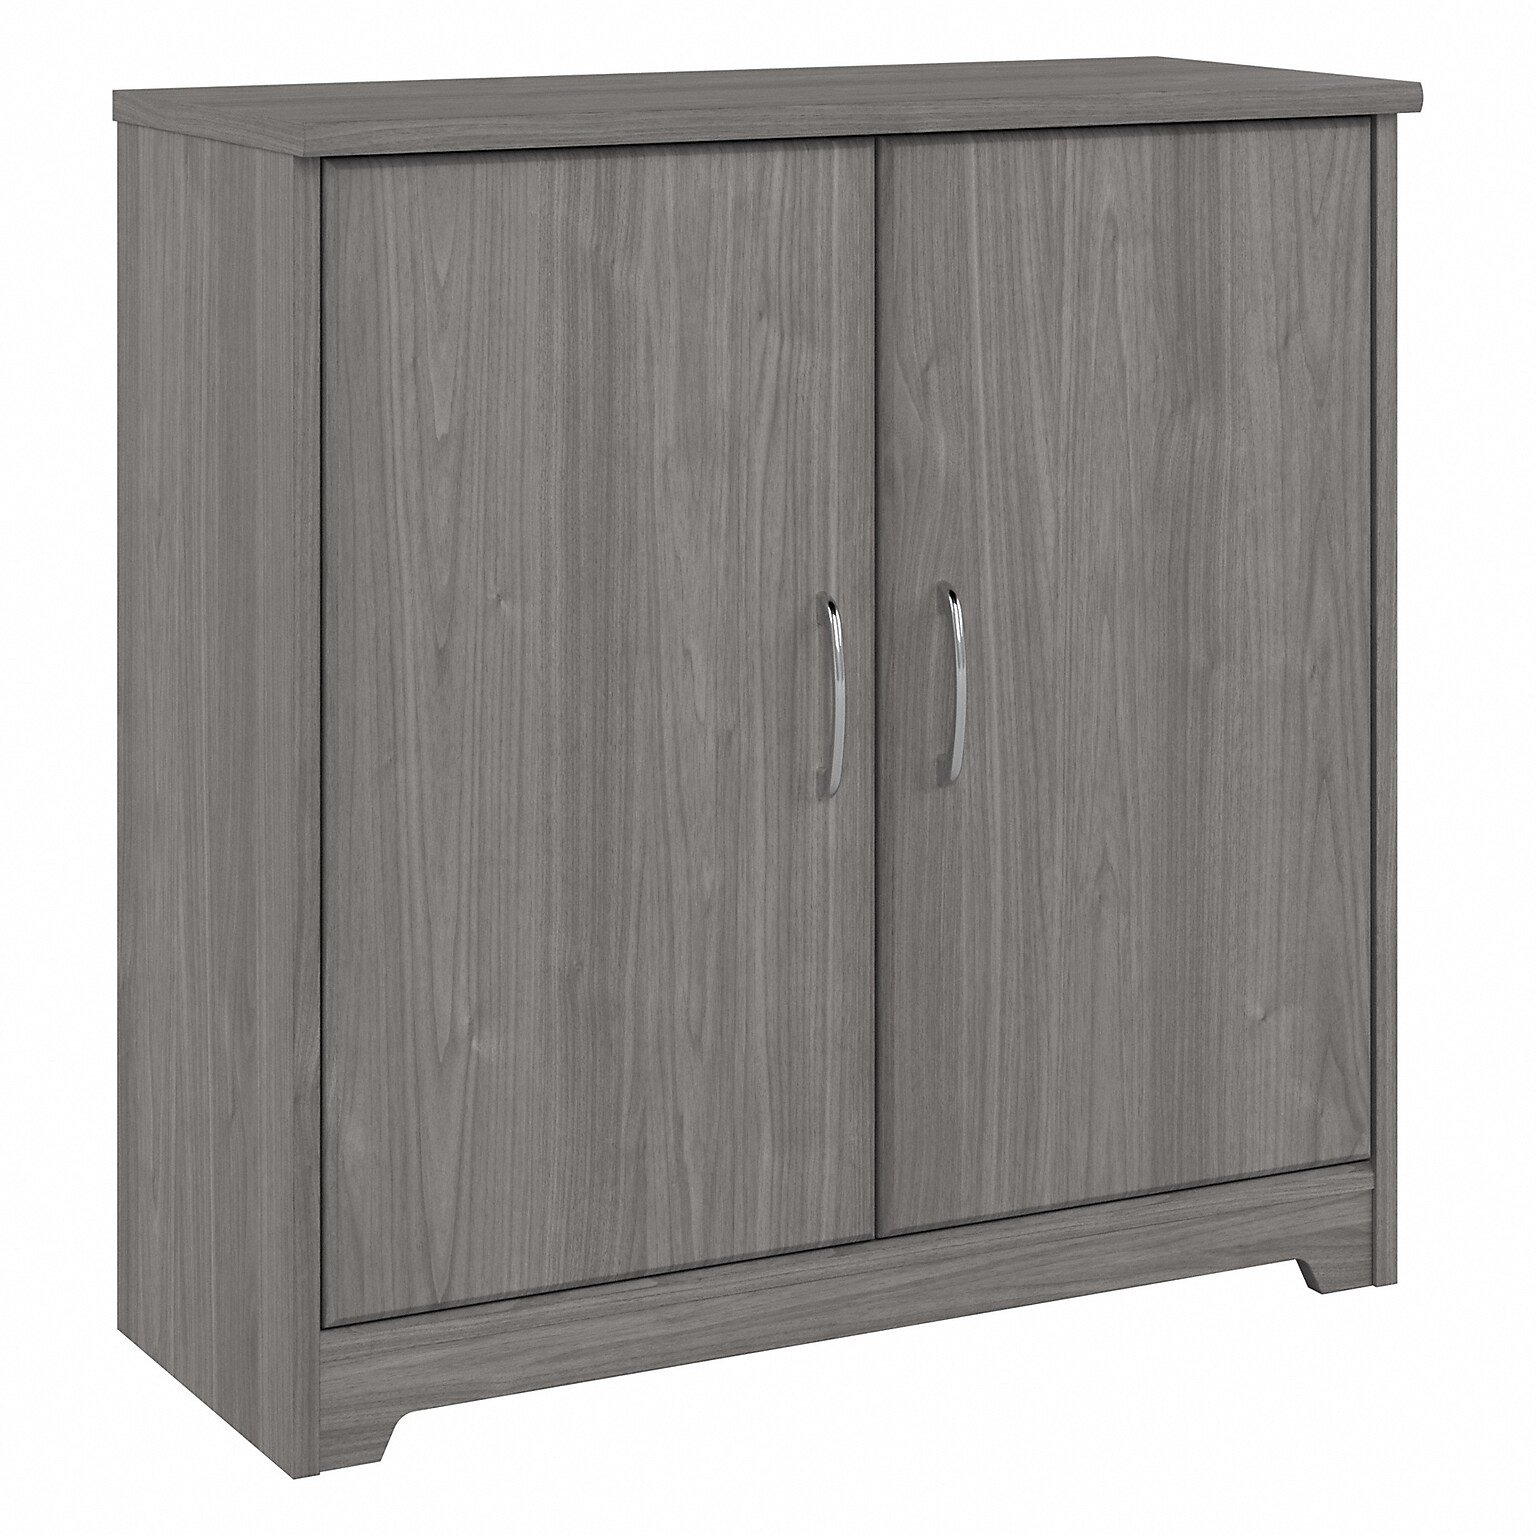 Bush Furniture Cabot 30.2 Storage Cabinet with 2 Shelves, Modern Gray (WC31398)